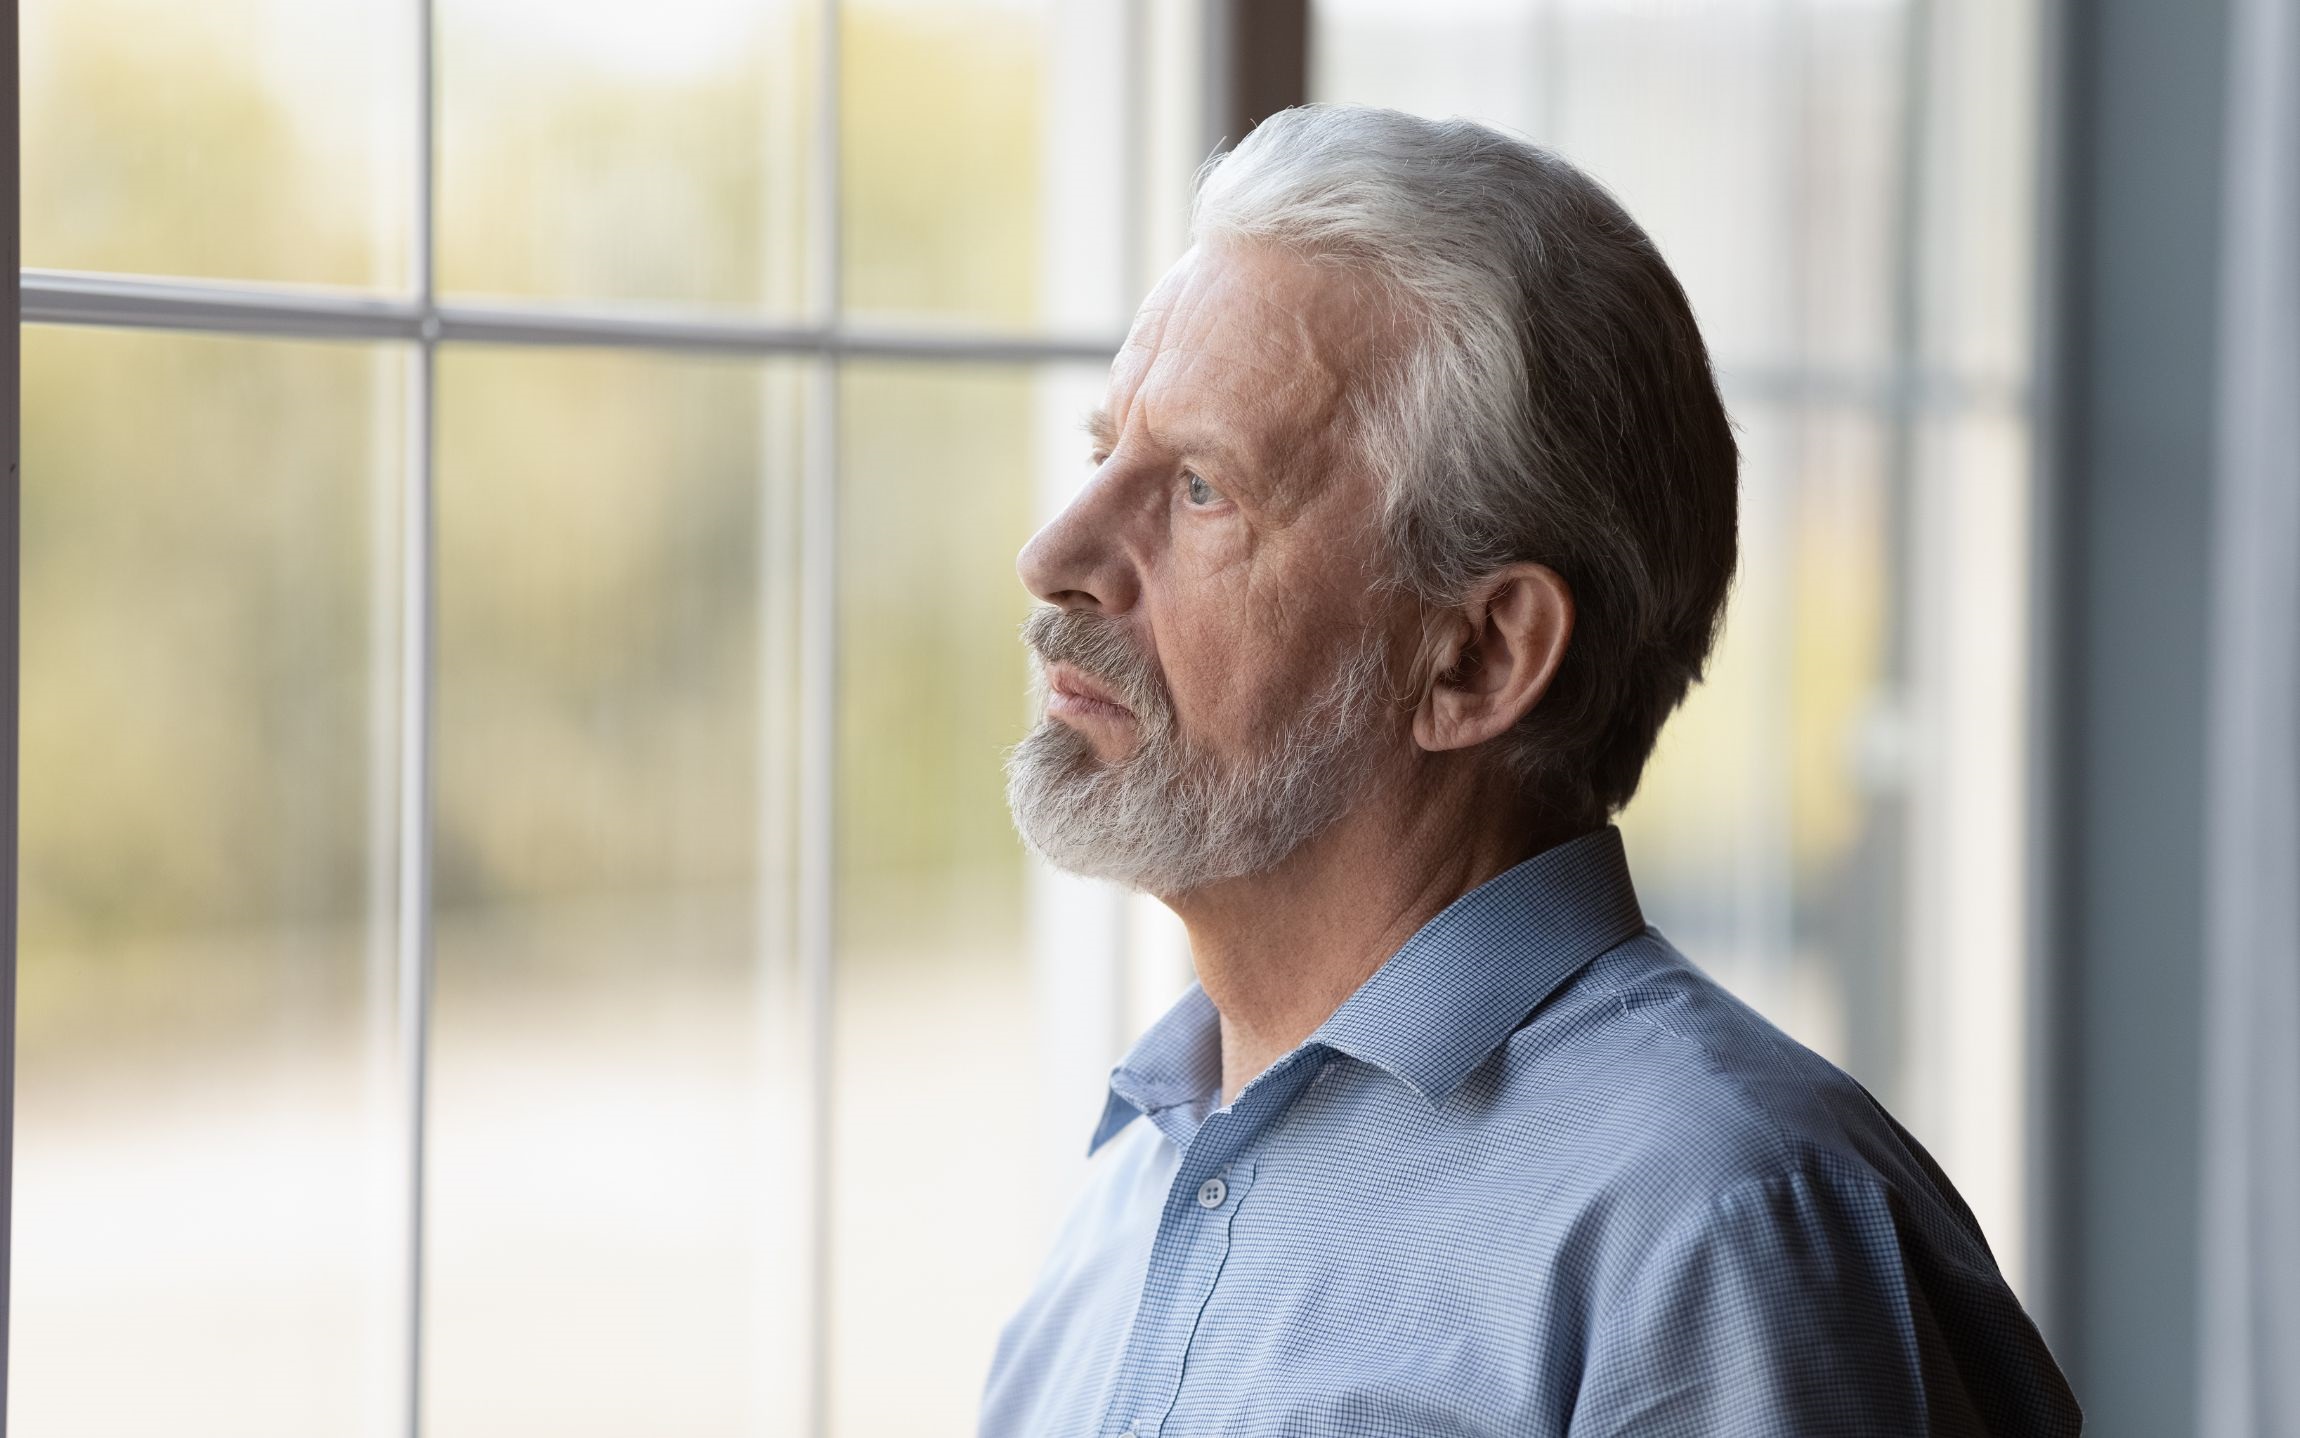 Older man with white hair looking out of a window with a sad expression on his face